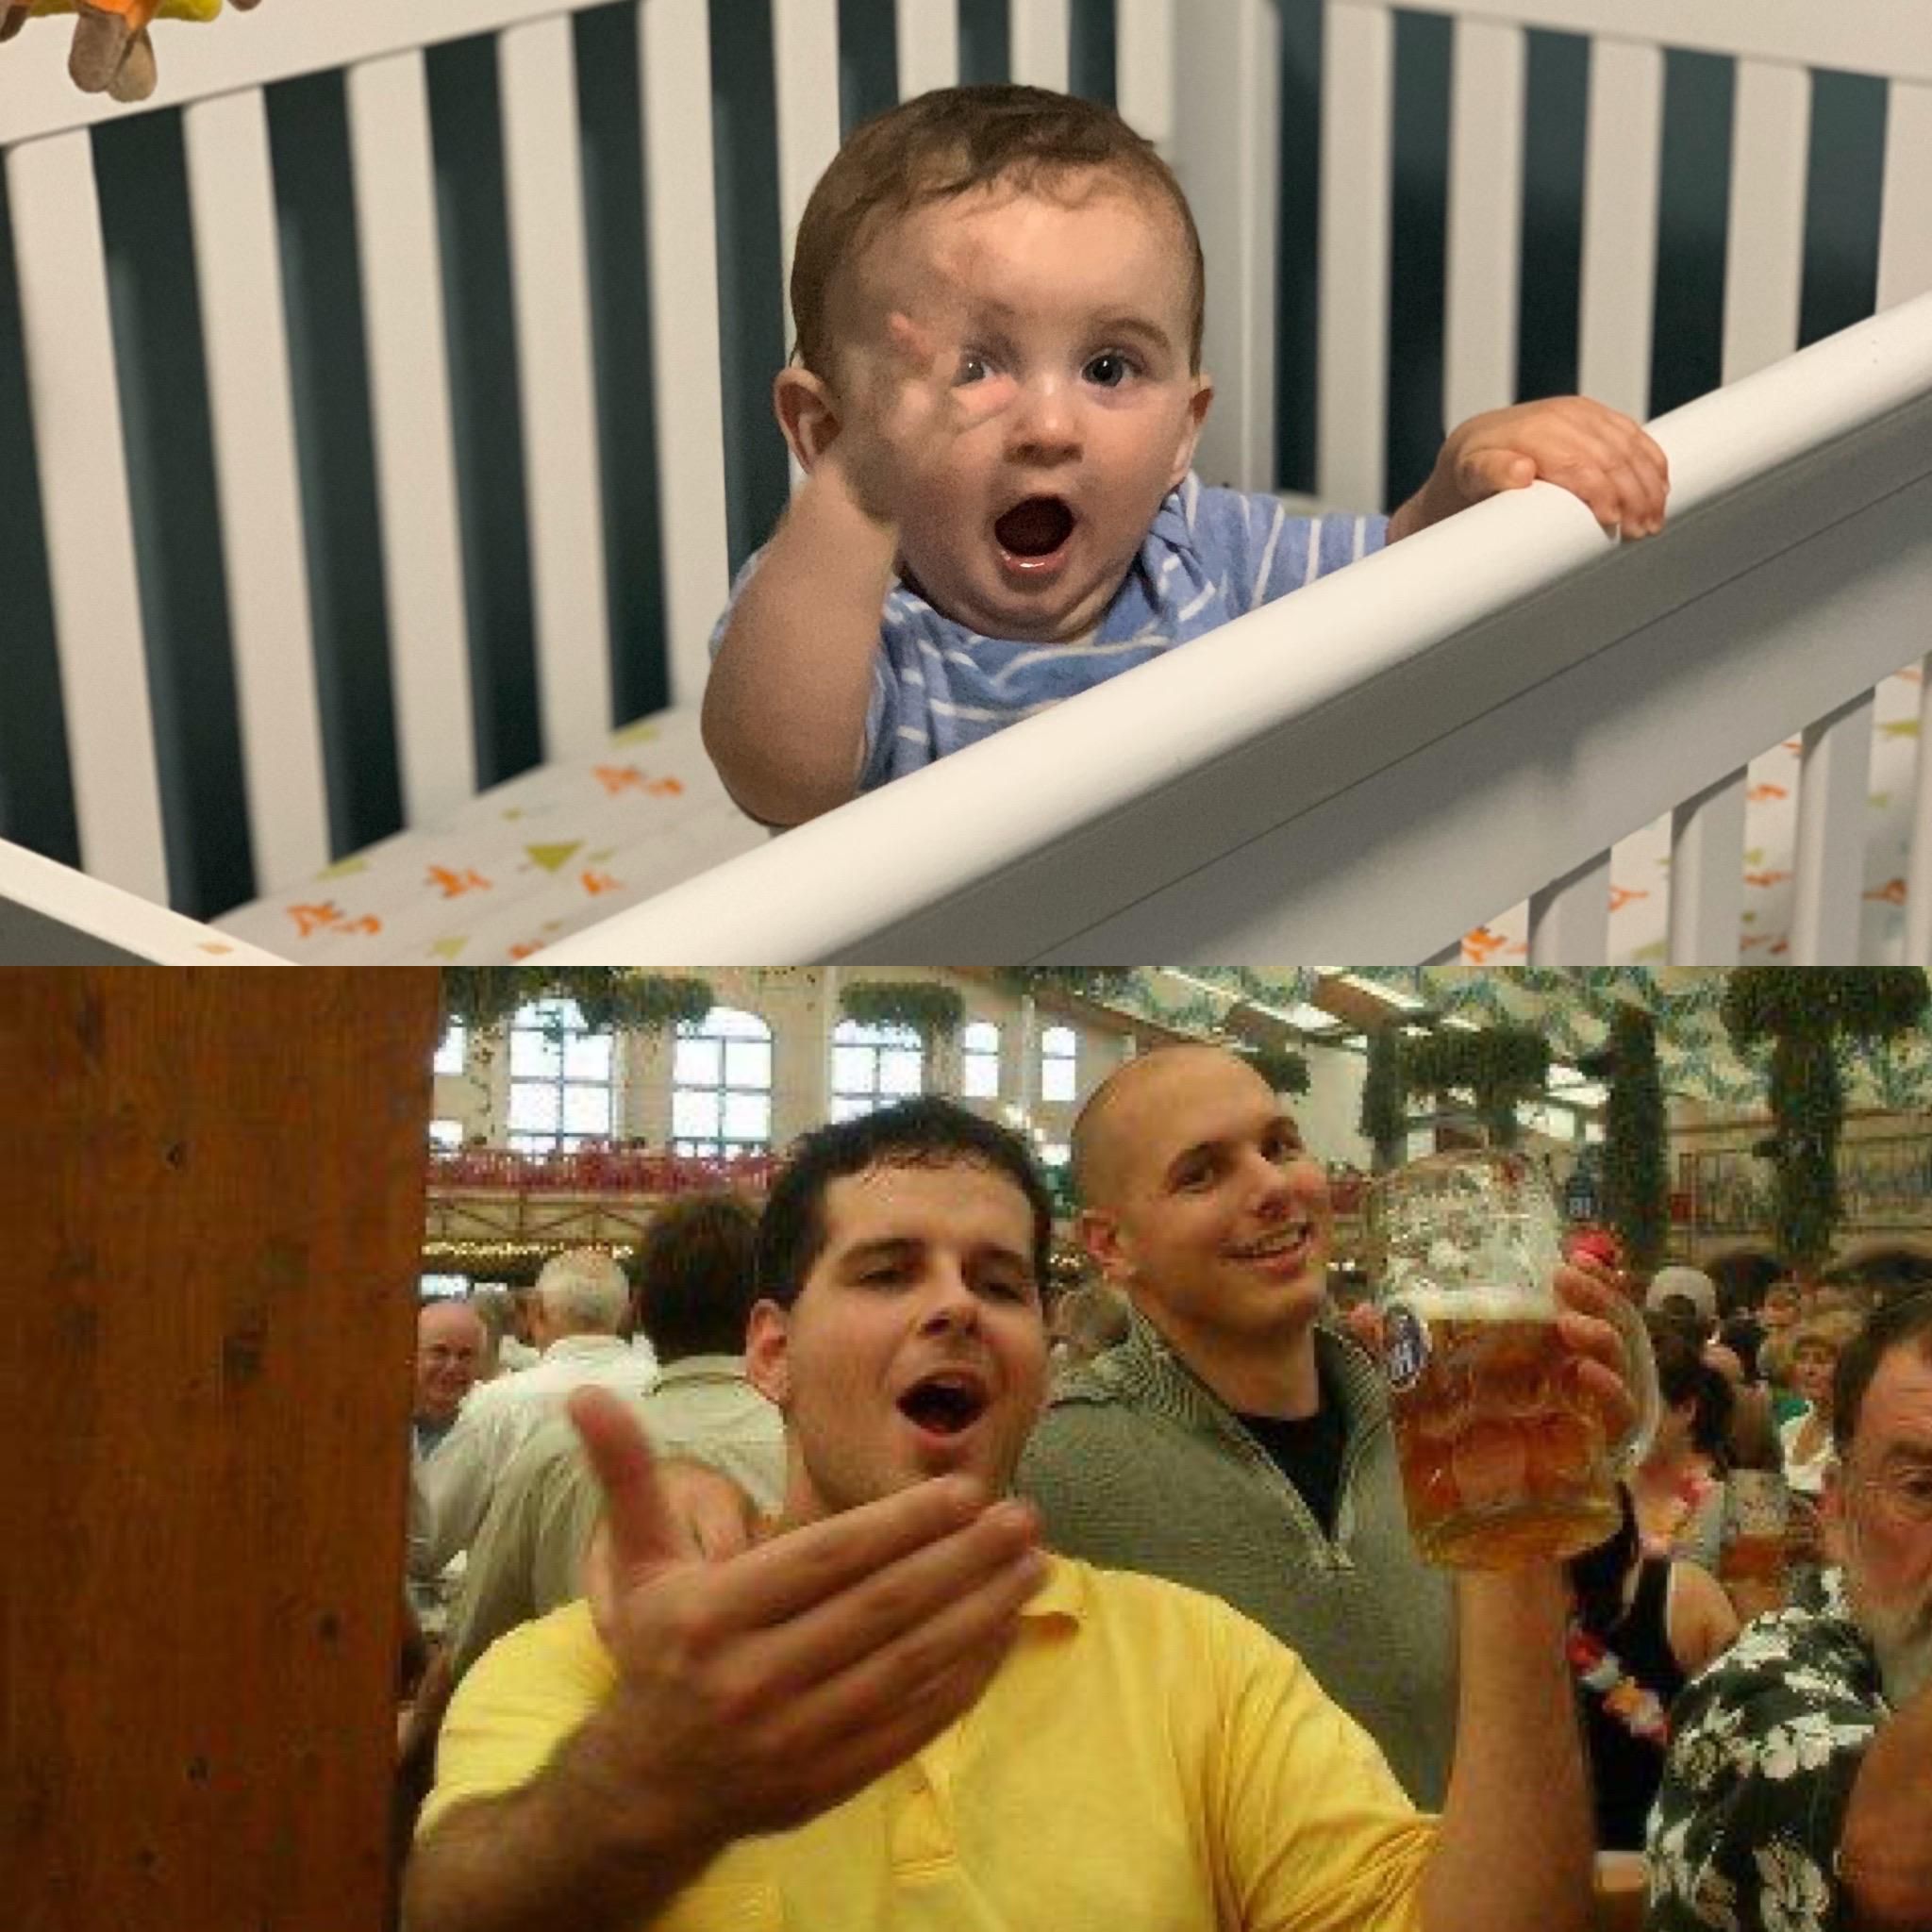 Sent my bro a pic of my 9-mo old son; he immediately dug up a pic of me 15 years earlier at Oktoberfest.